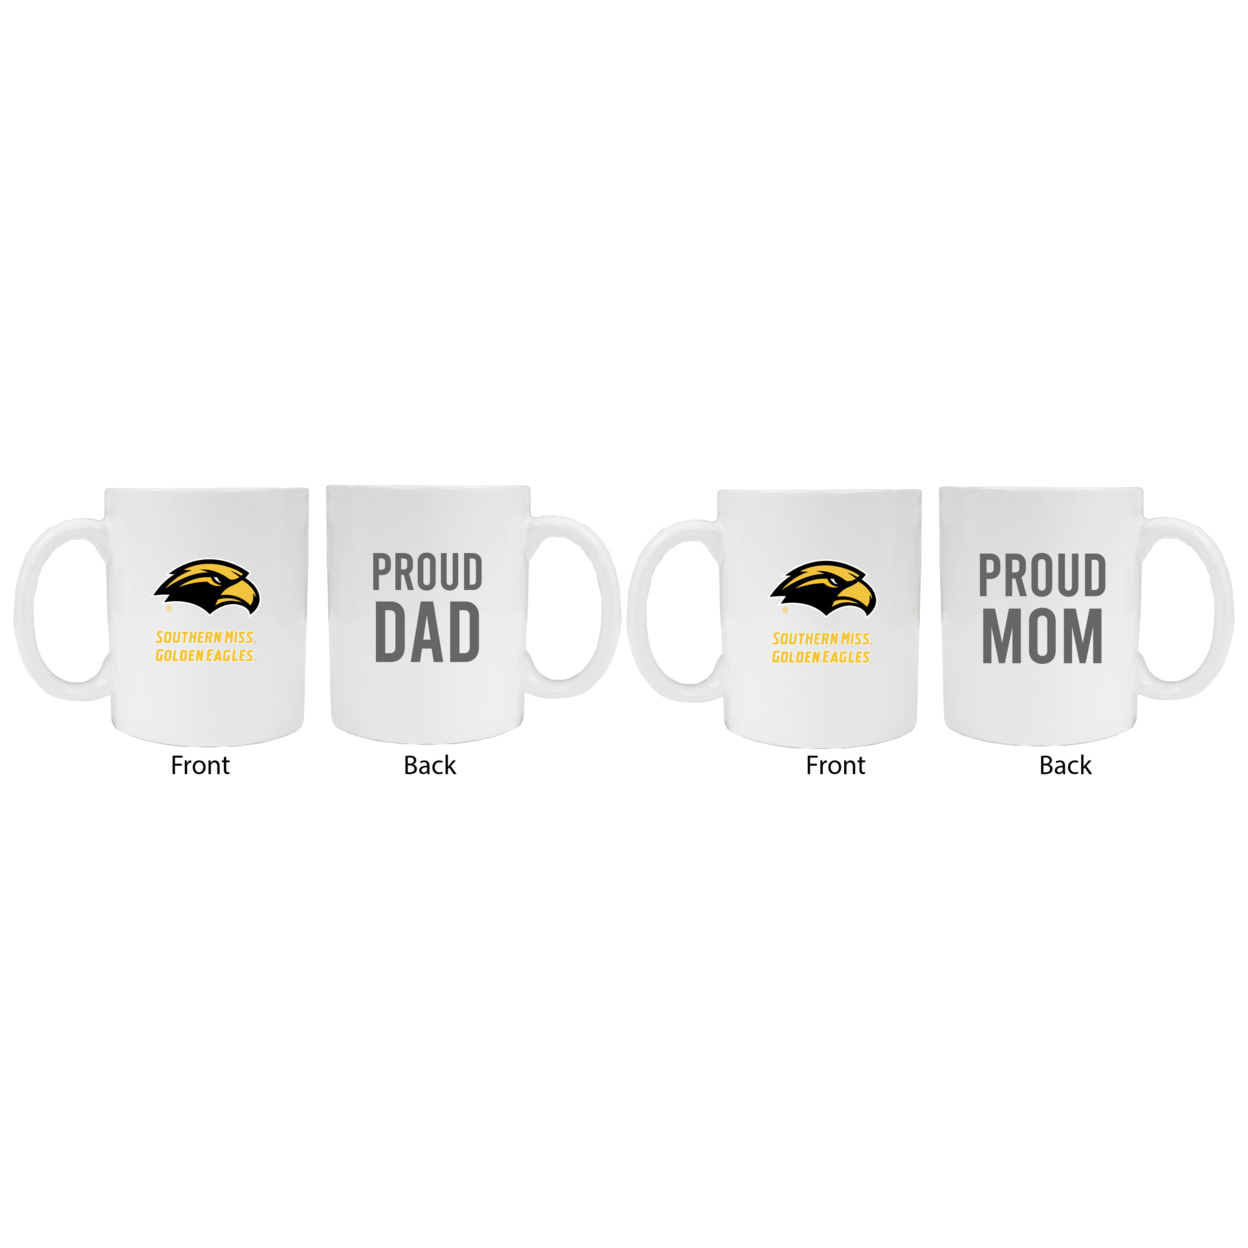 Southern Mississippi Golden Eagles Proud Mom And Dad White Ceramic Coffee Mug 2 Pack (White).